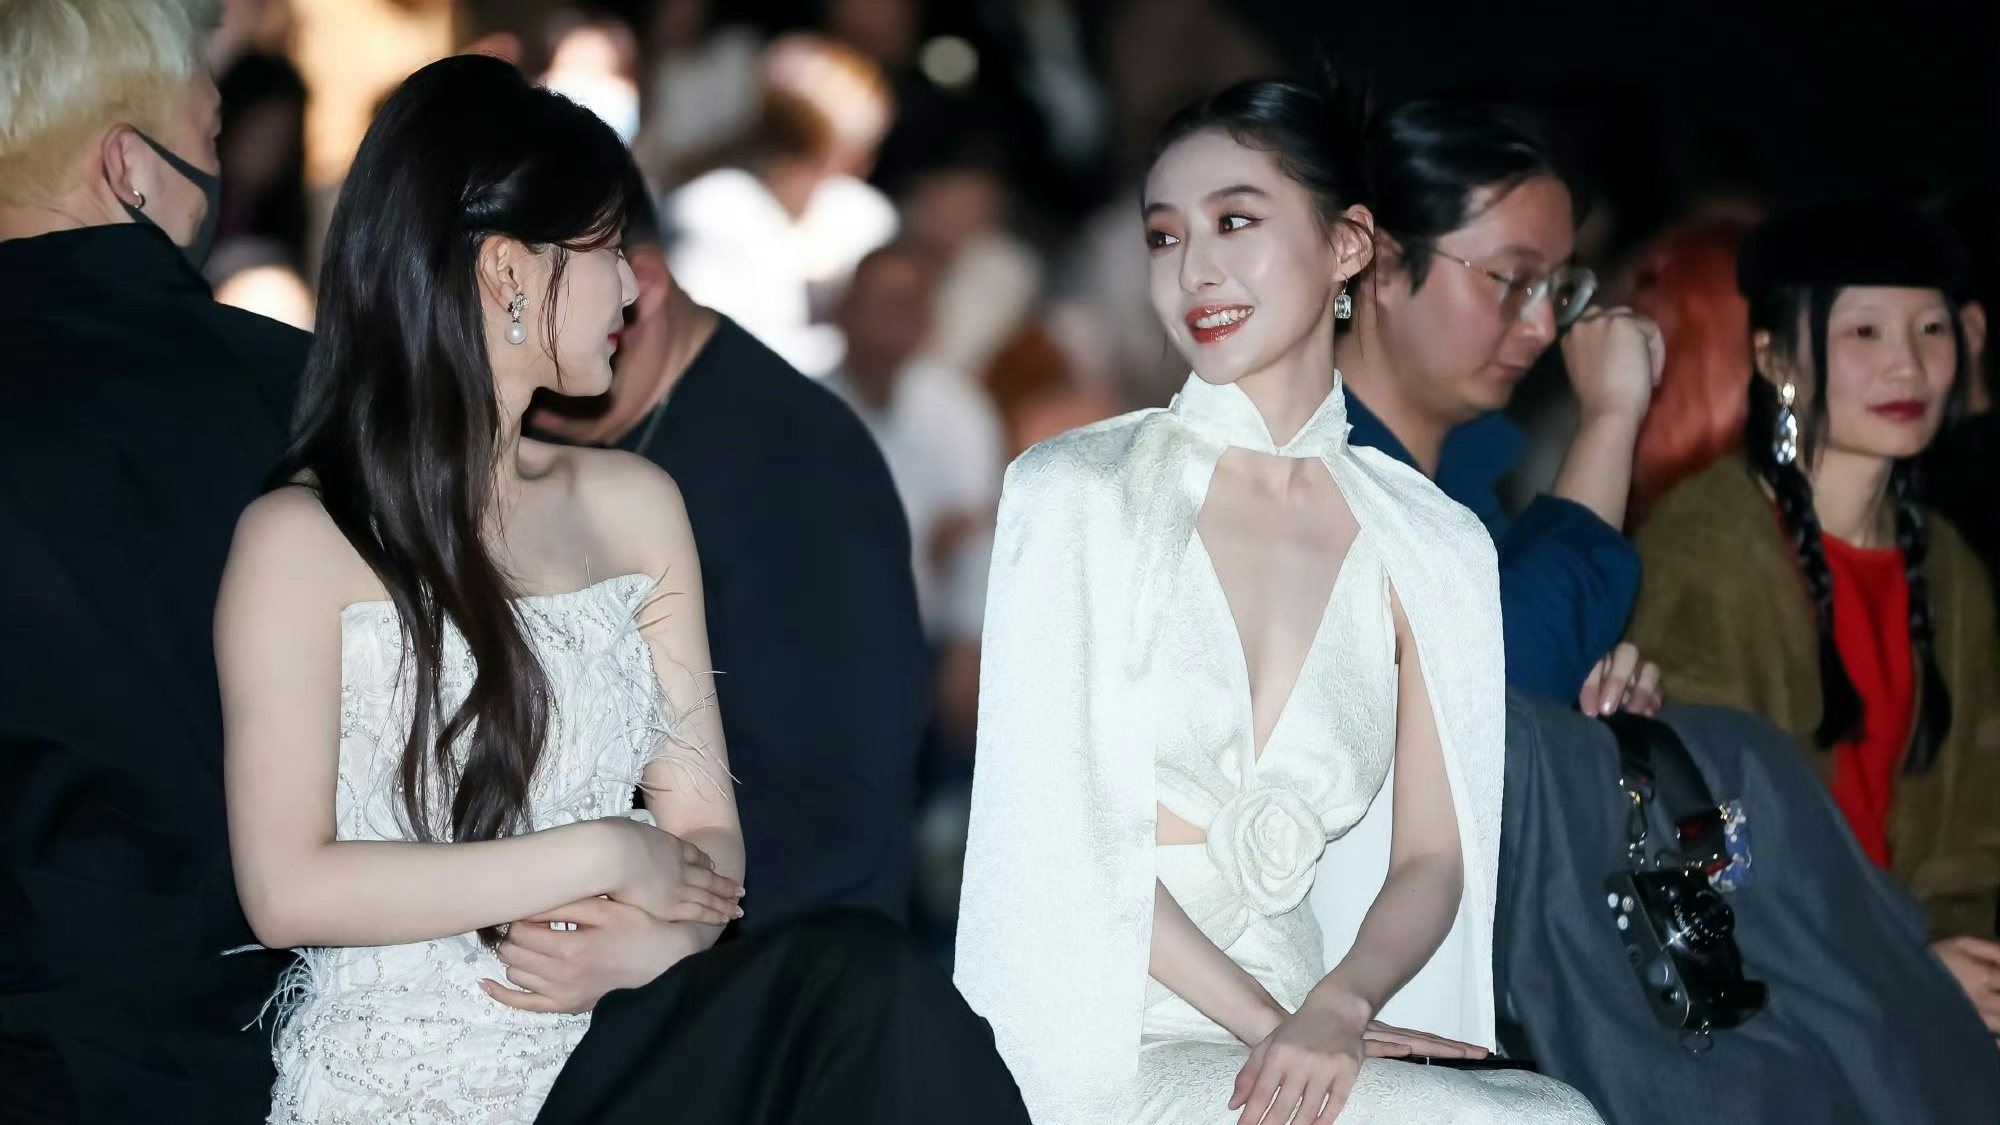 Yang Chaoyue and Angelababy at the Le Fame show. Photo: Shanghai Fashion Week Weibo